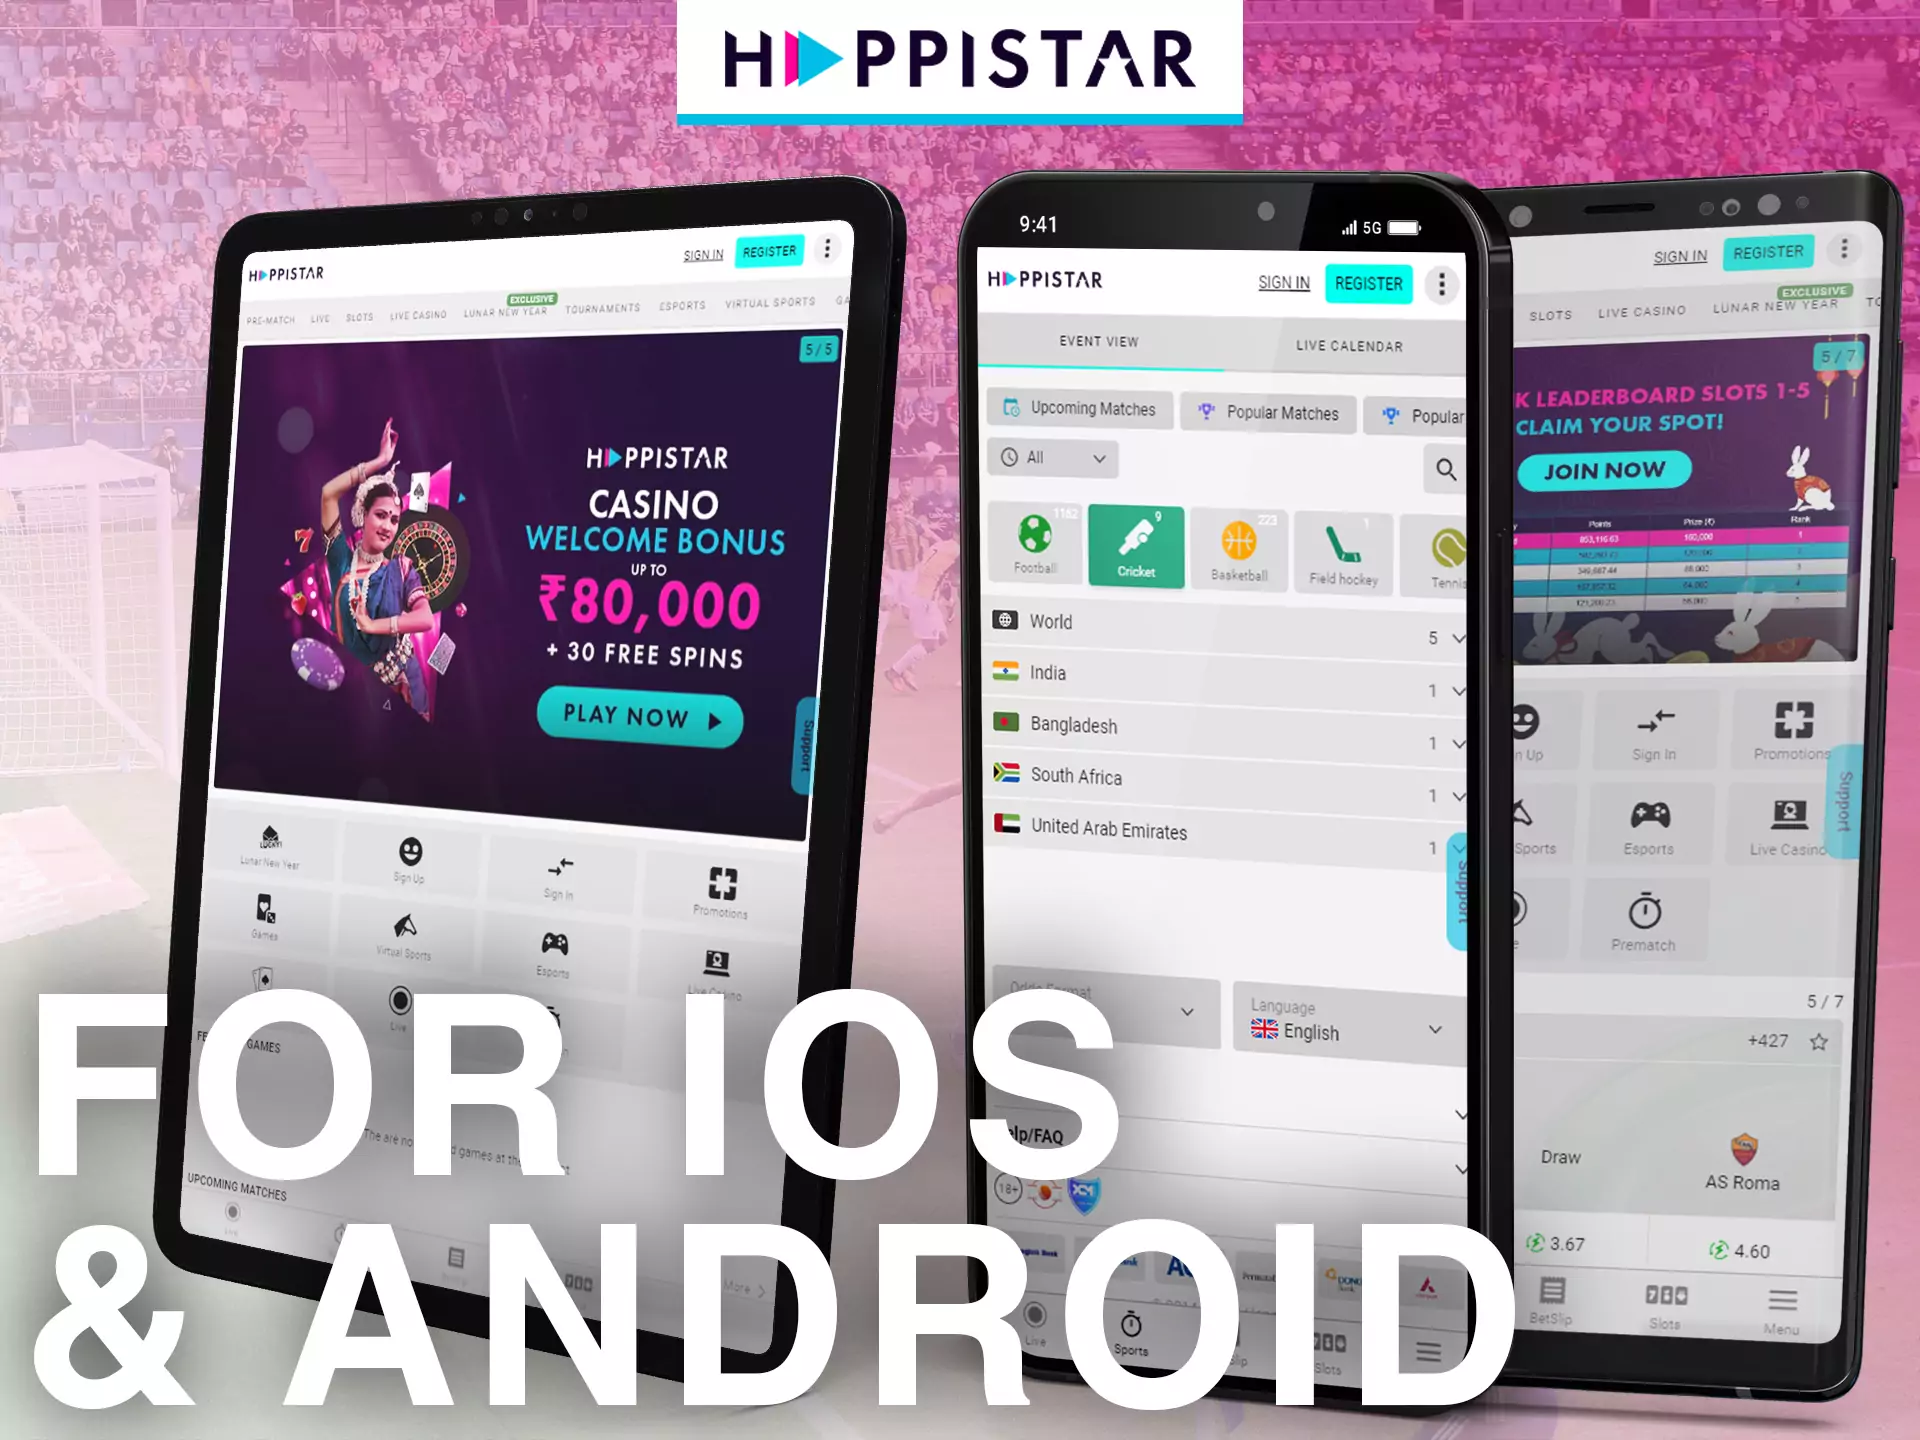 Happistar works great on all types of devices.